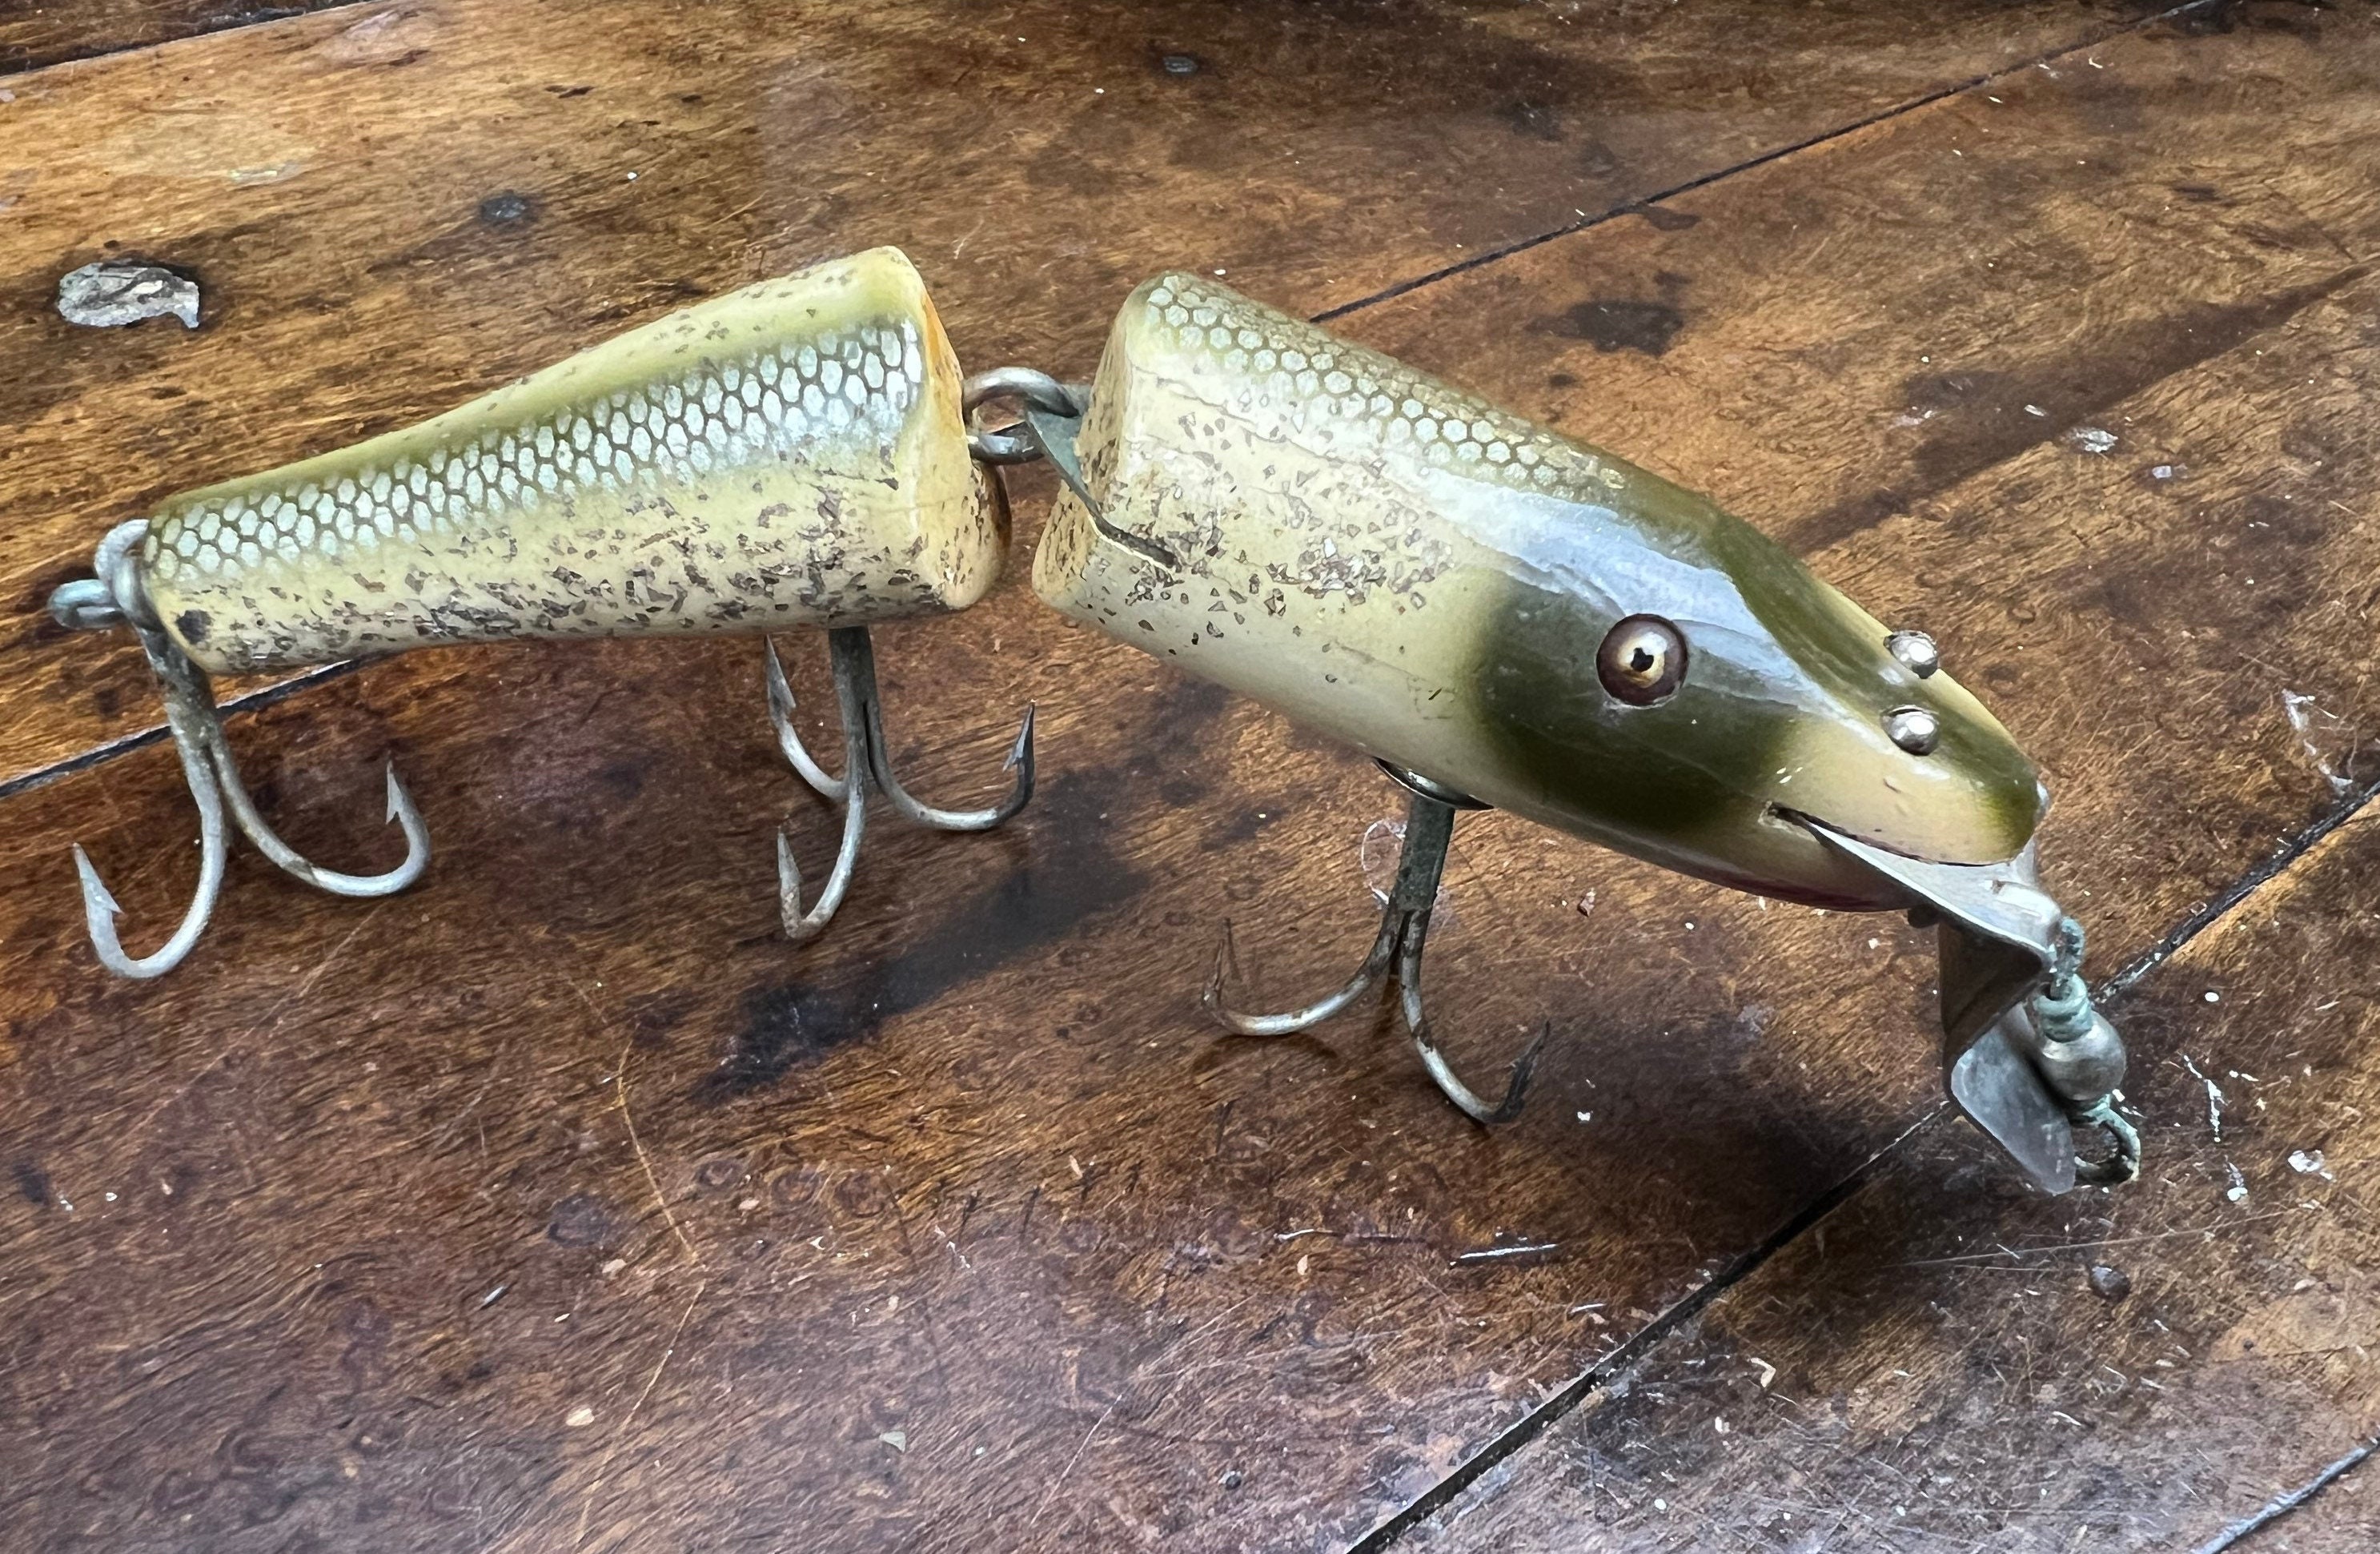 Vintage Fishing Lure Lot of Two Chubb Creek Darter Father's Day Gift Fishing  Gift for Dad 